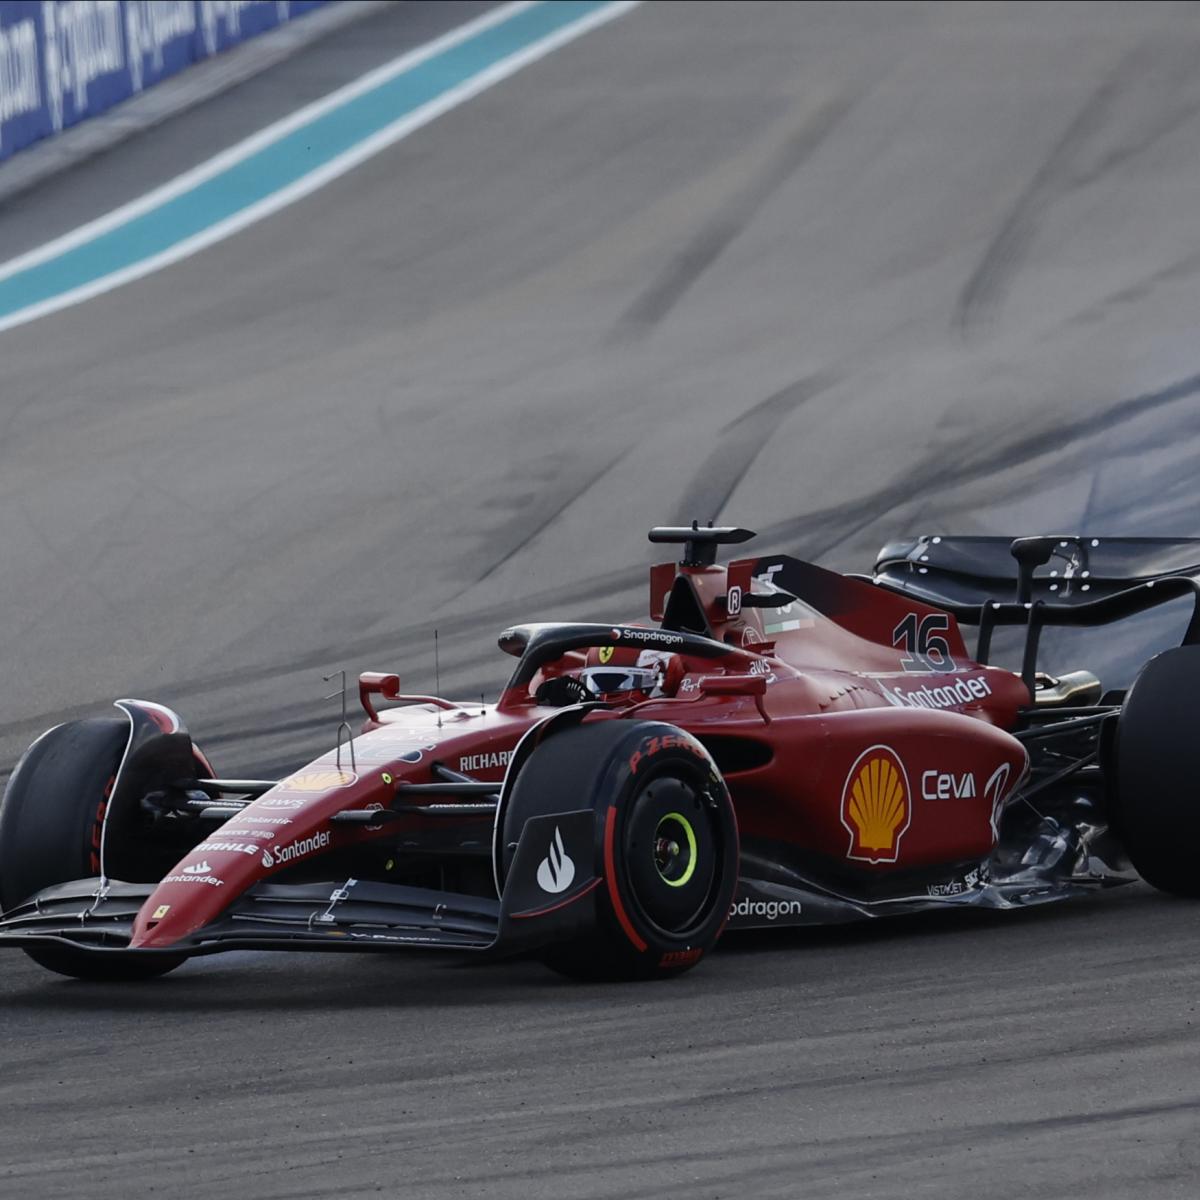 Miami F1 Grand Prix 2022: Odds, Preview and Top Storylines